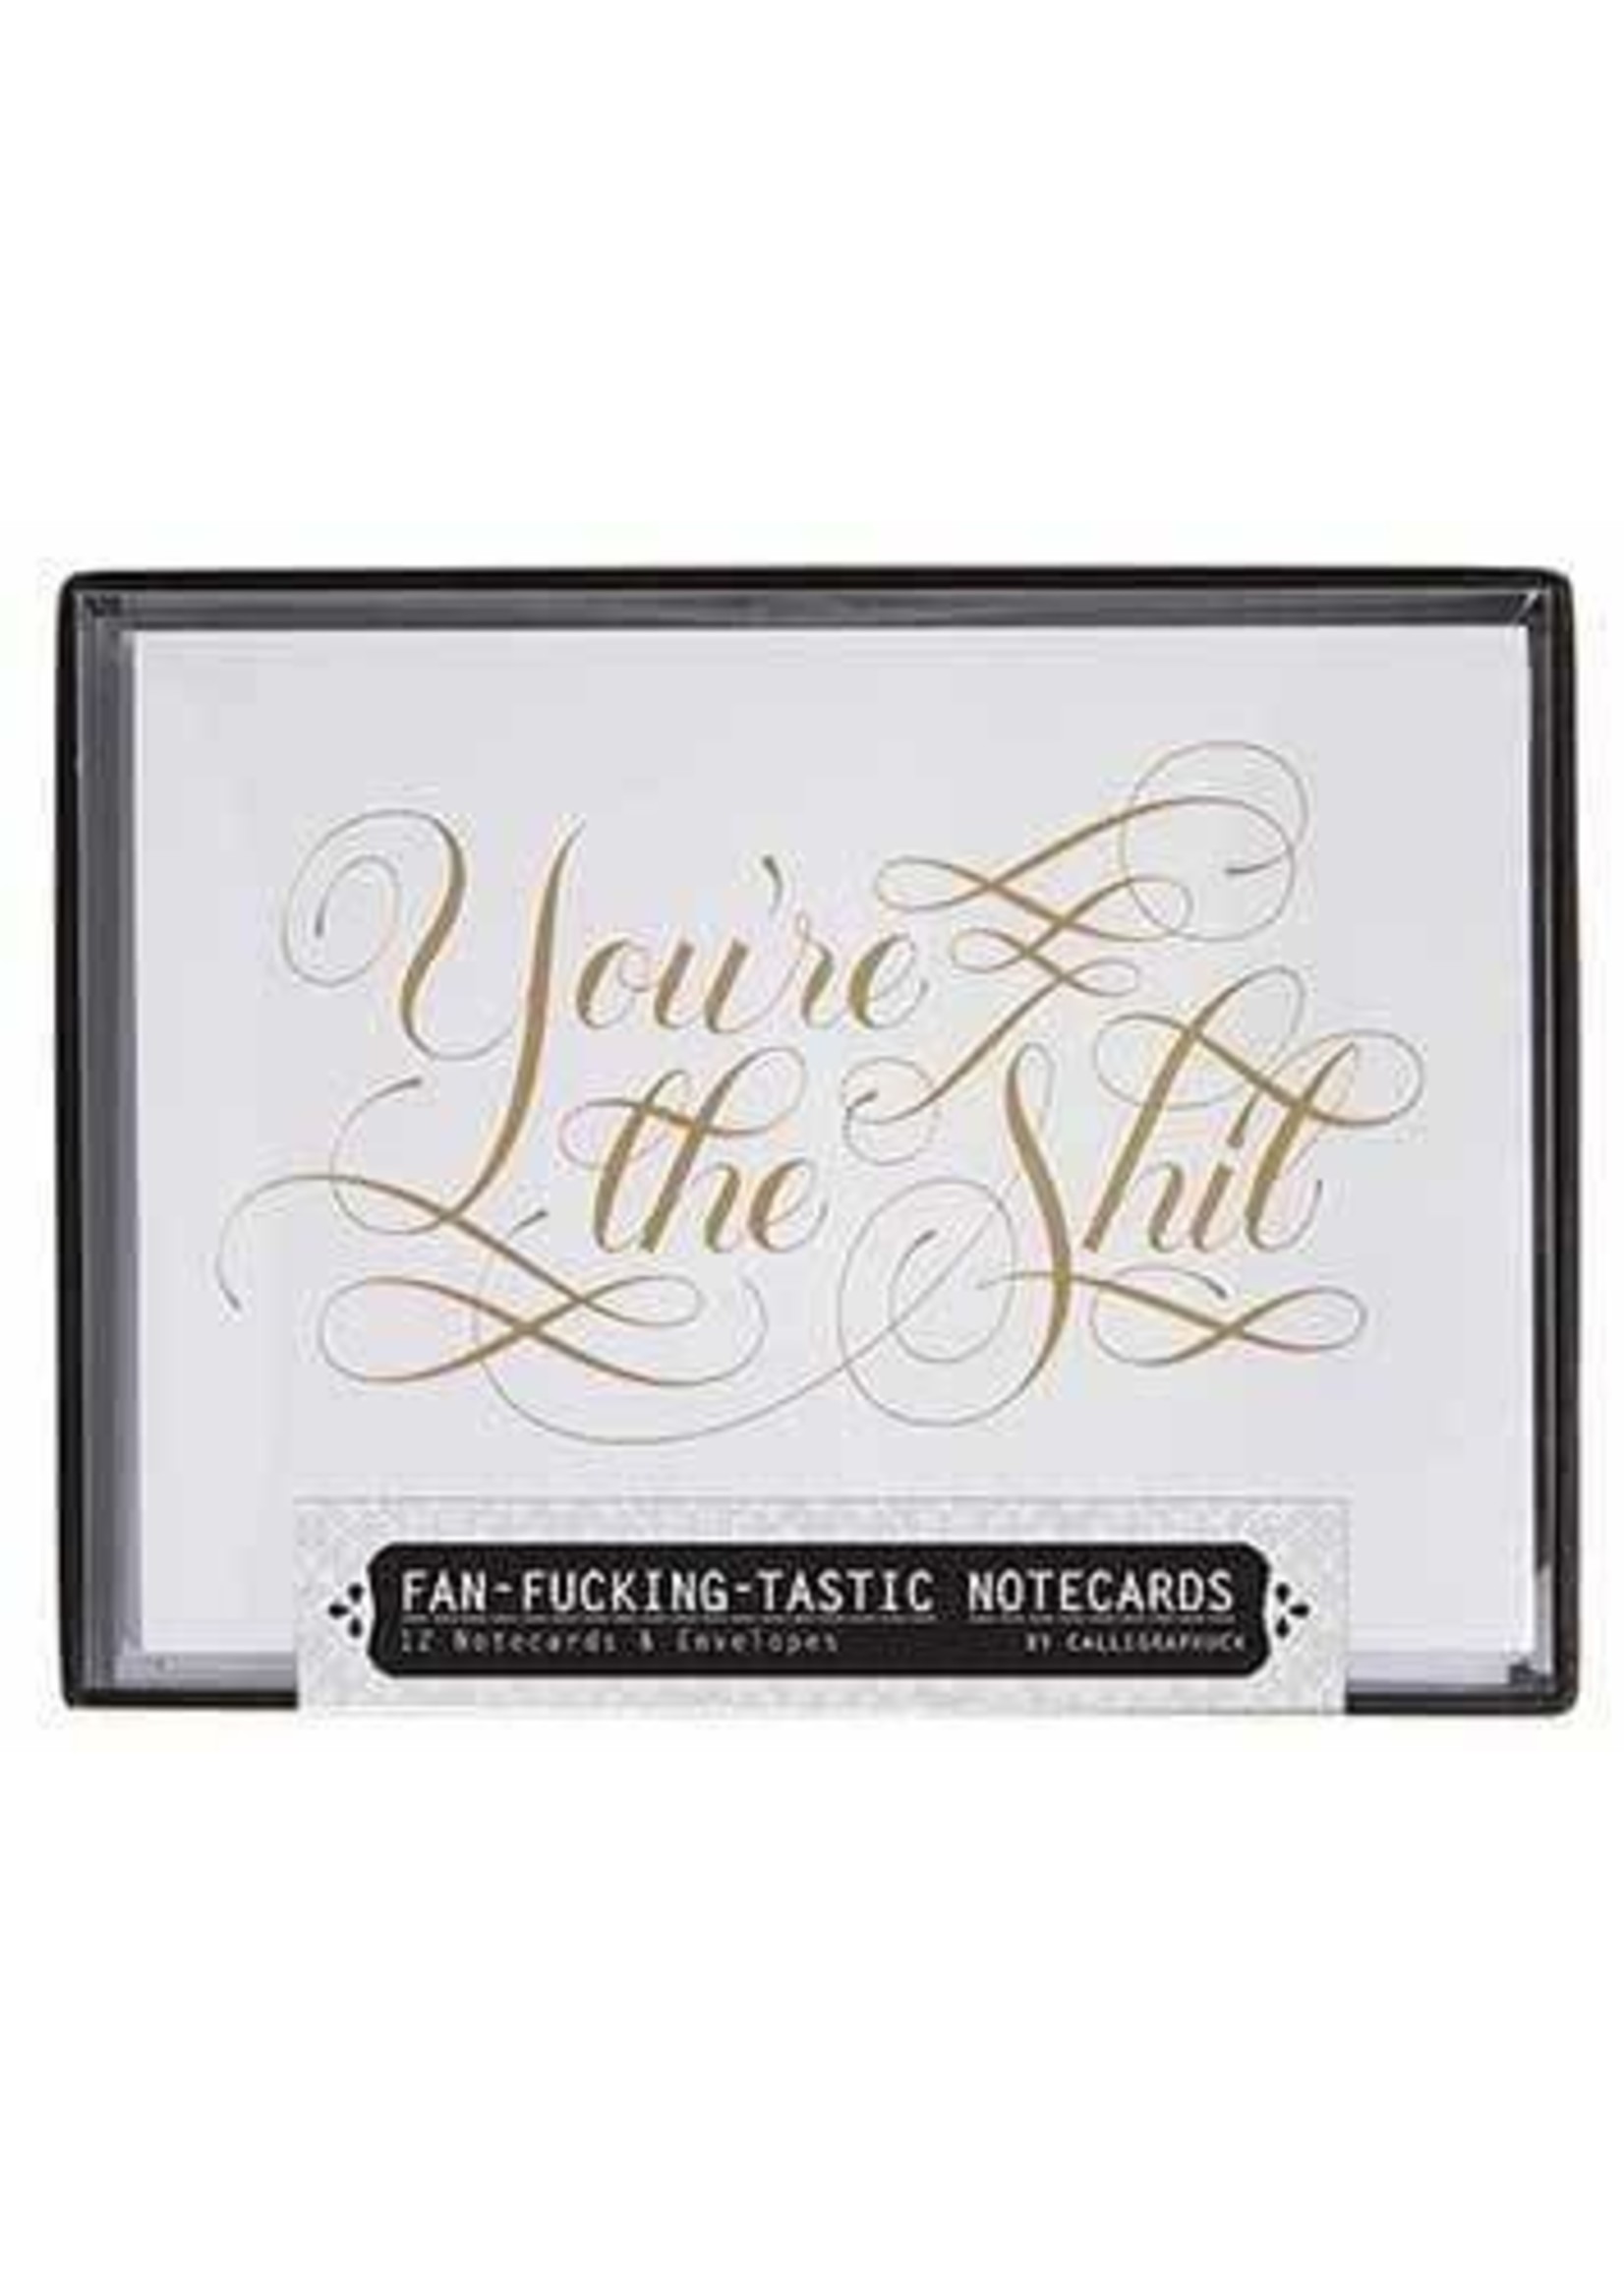 Fan-fucking-tastic Notecards 12 Notecards & Envelopes by Calligraphuck